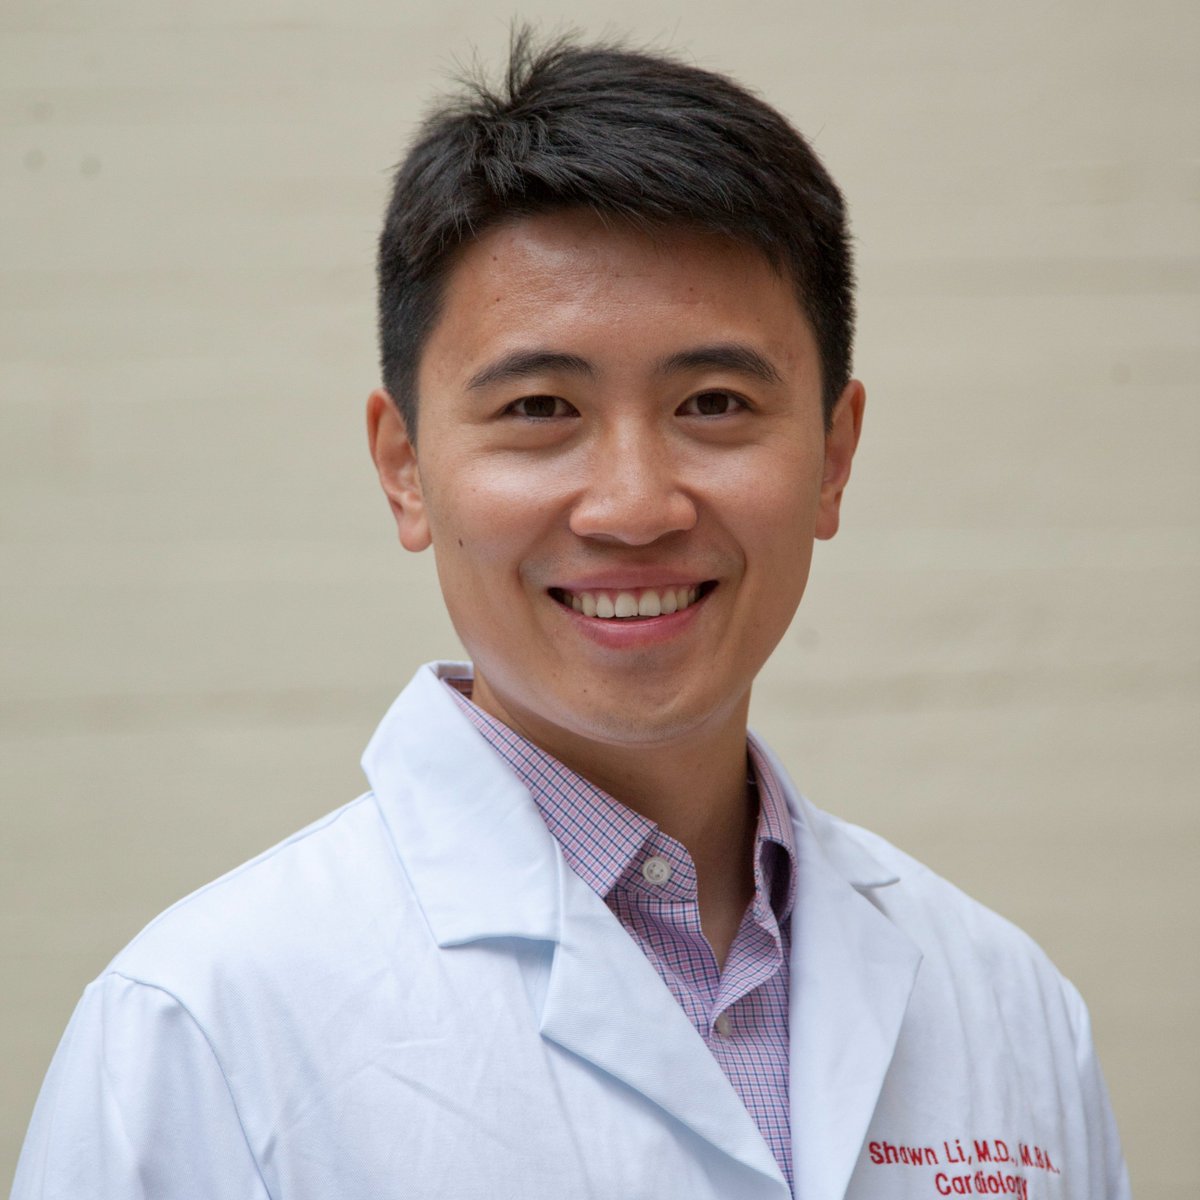 Congratulations to @ShawnXLiMD who was recognized with the Fellow of the Year Award for the #Cardiology Division. Voted on by @UCSF medicine residents, this award is given to one fellow in each division who exemplifies great teaching. @UCSFMedicine @UCSF_CVfellows